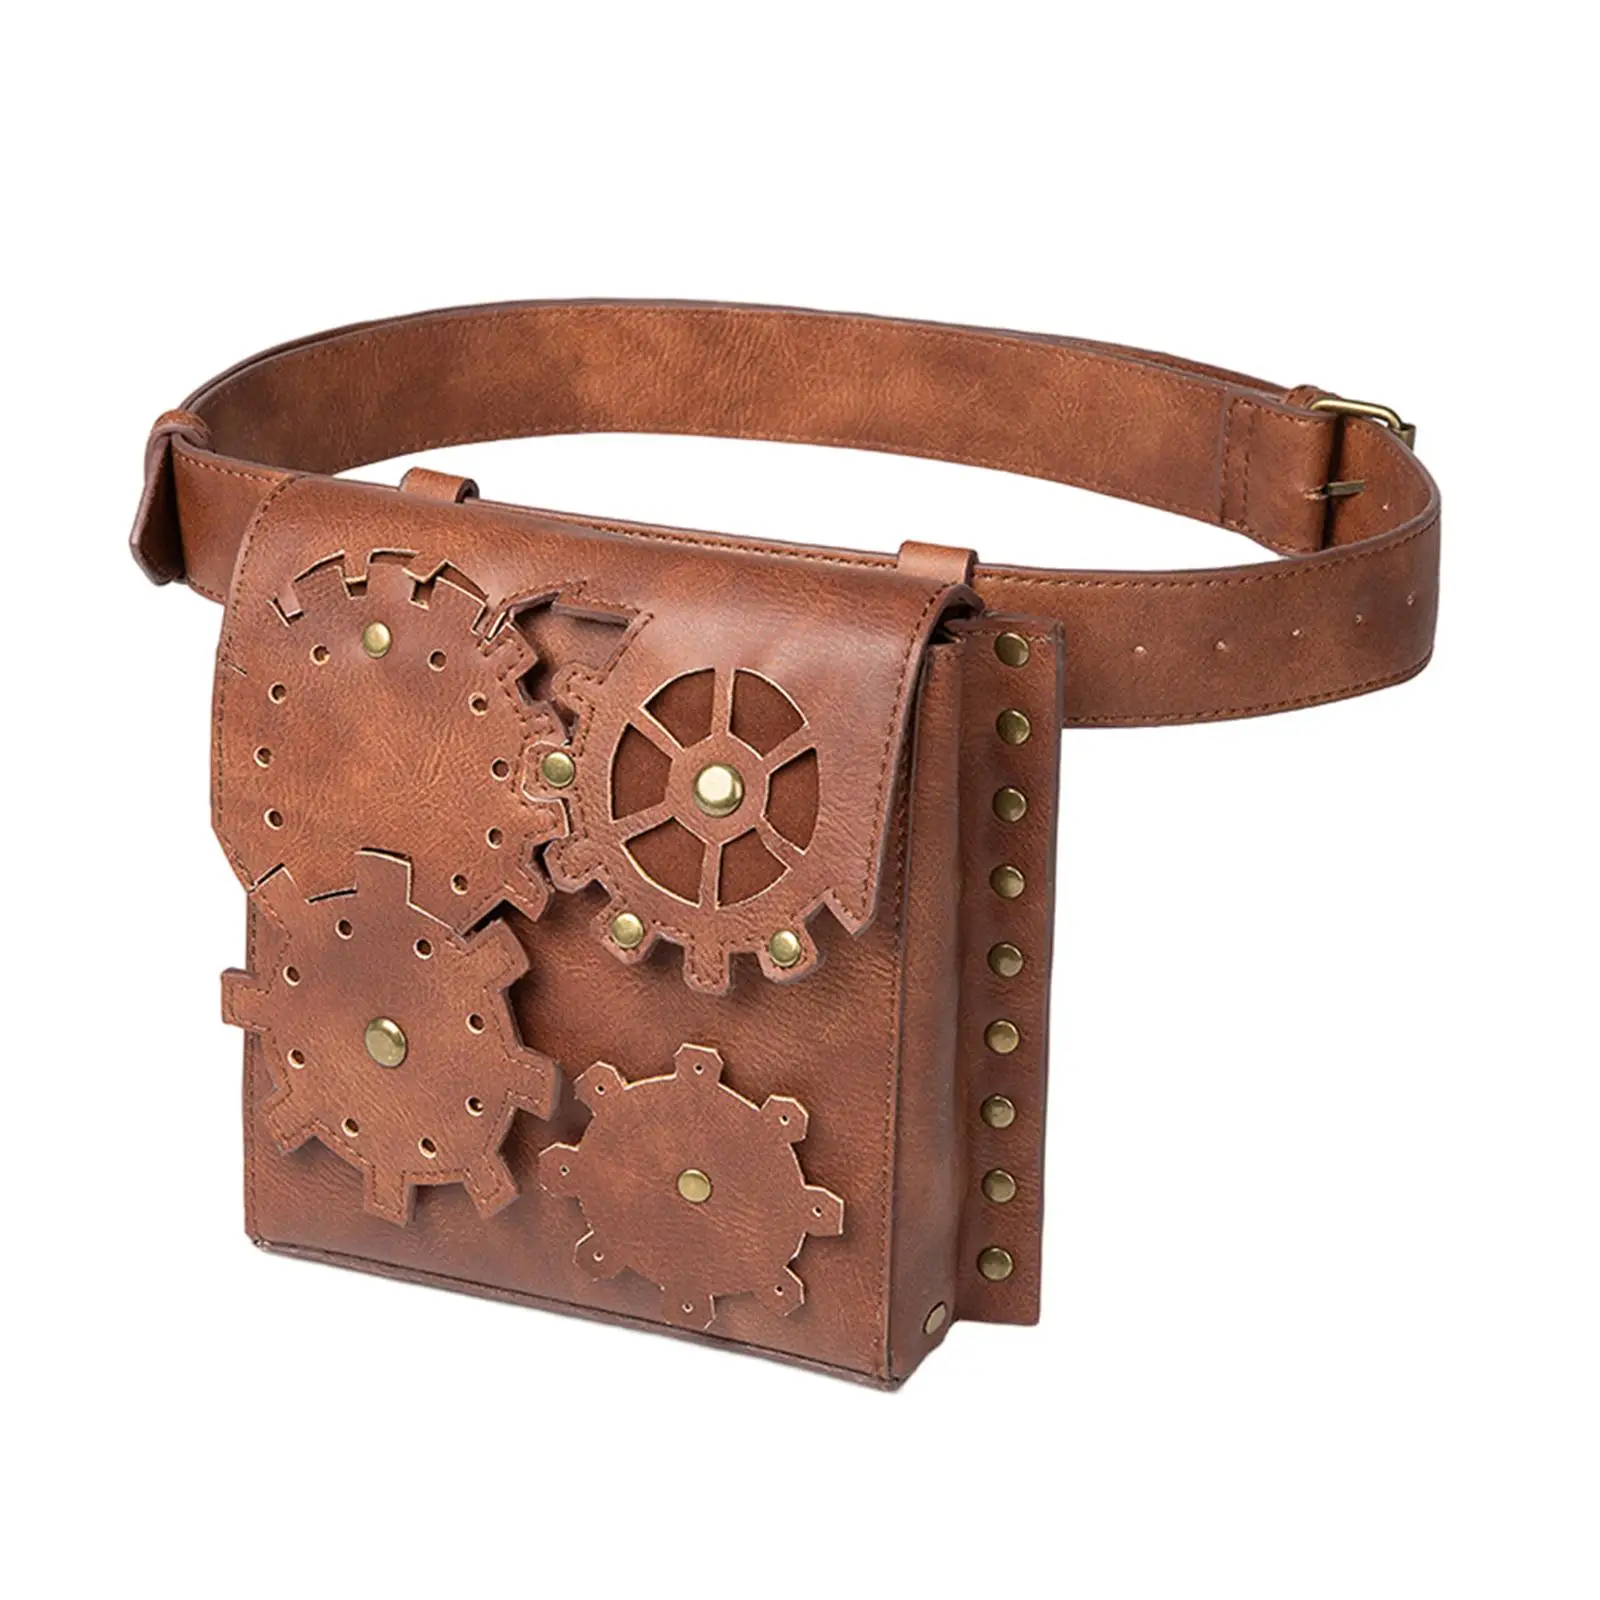 Medieval Belt Pouch Waist Pack Bag Fashion Wallet Leather Utility Belt Drop Fanny Pack for Running Outdoor Cosplay Riding